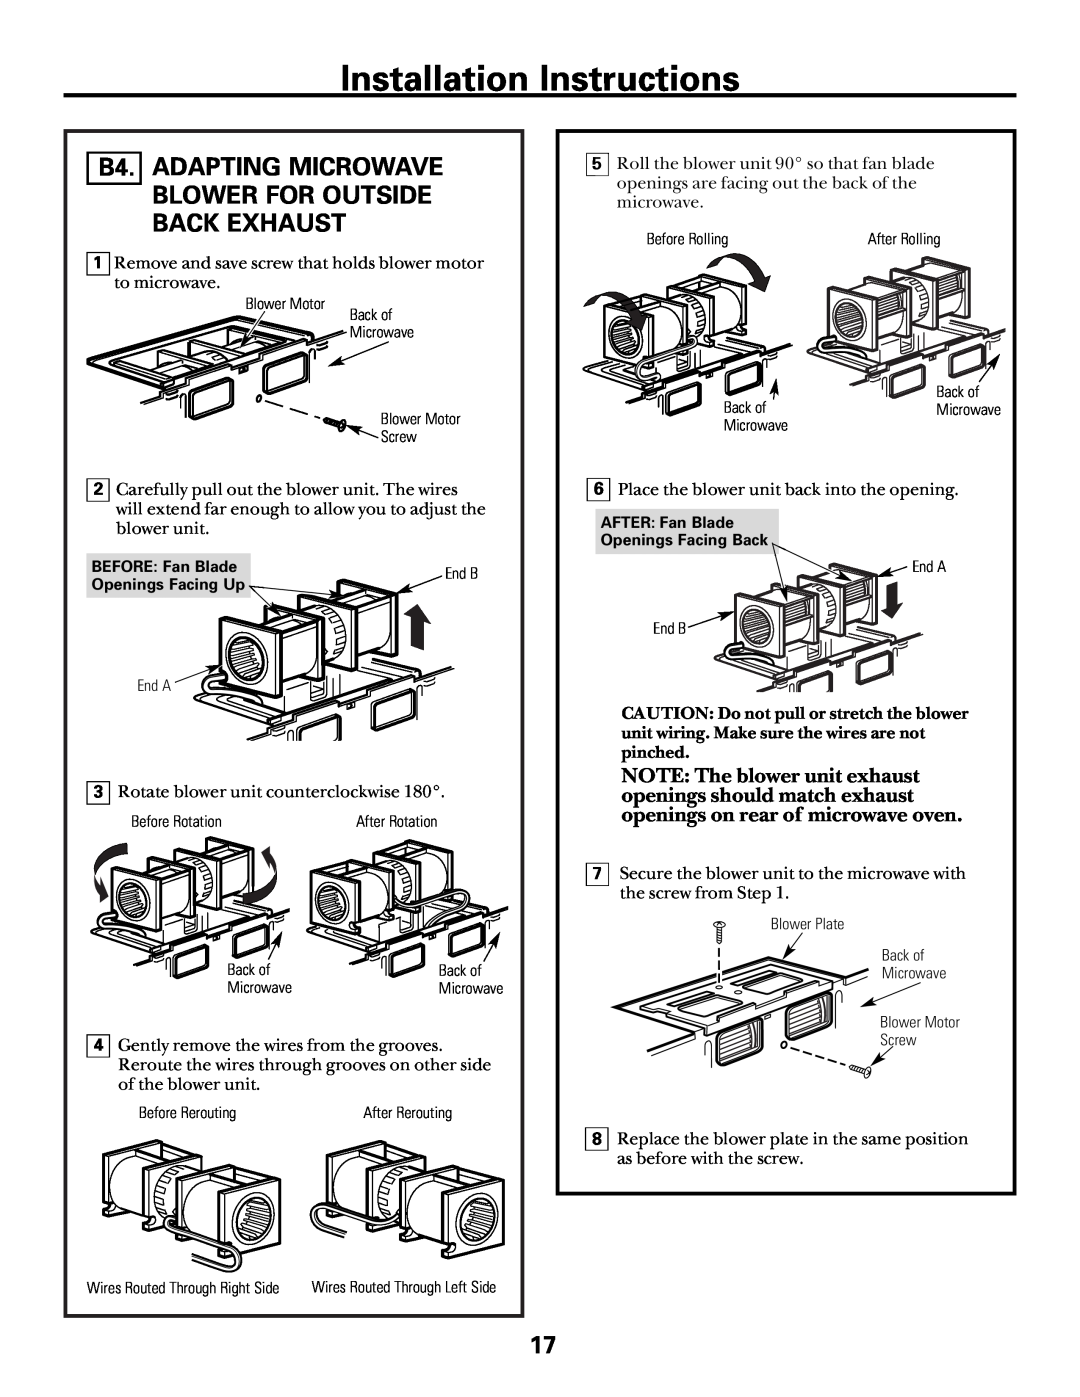 GE Over the Range Microwave Oven manual B4. ADAPTING MICROWAVE BLOWER FOR OUTSIDE BACK EXHAUST, Installation Instructions 